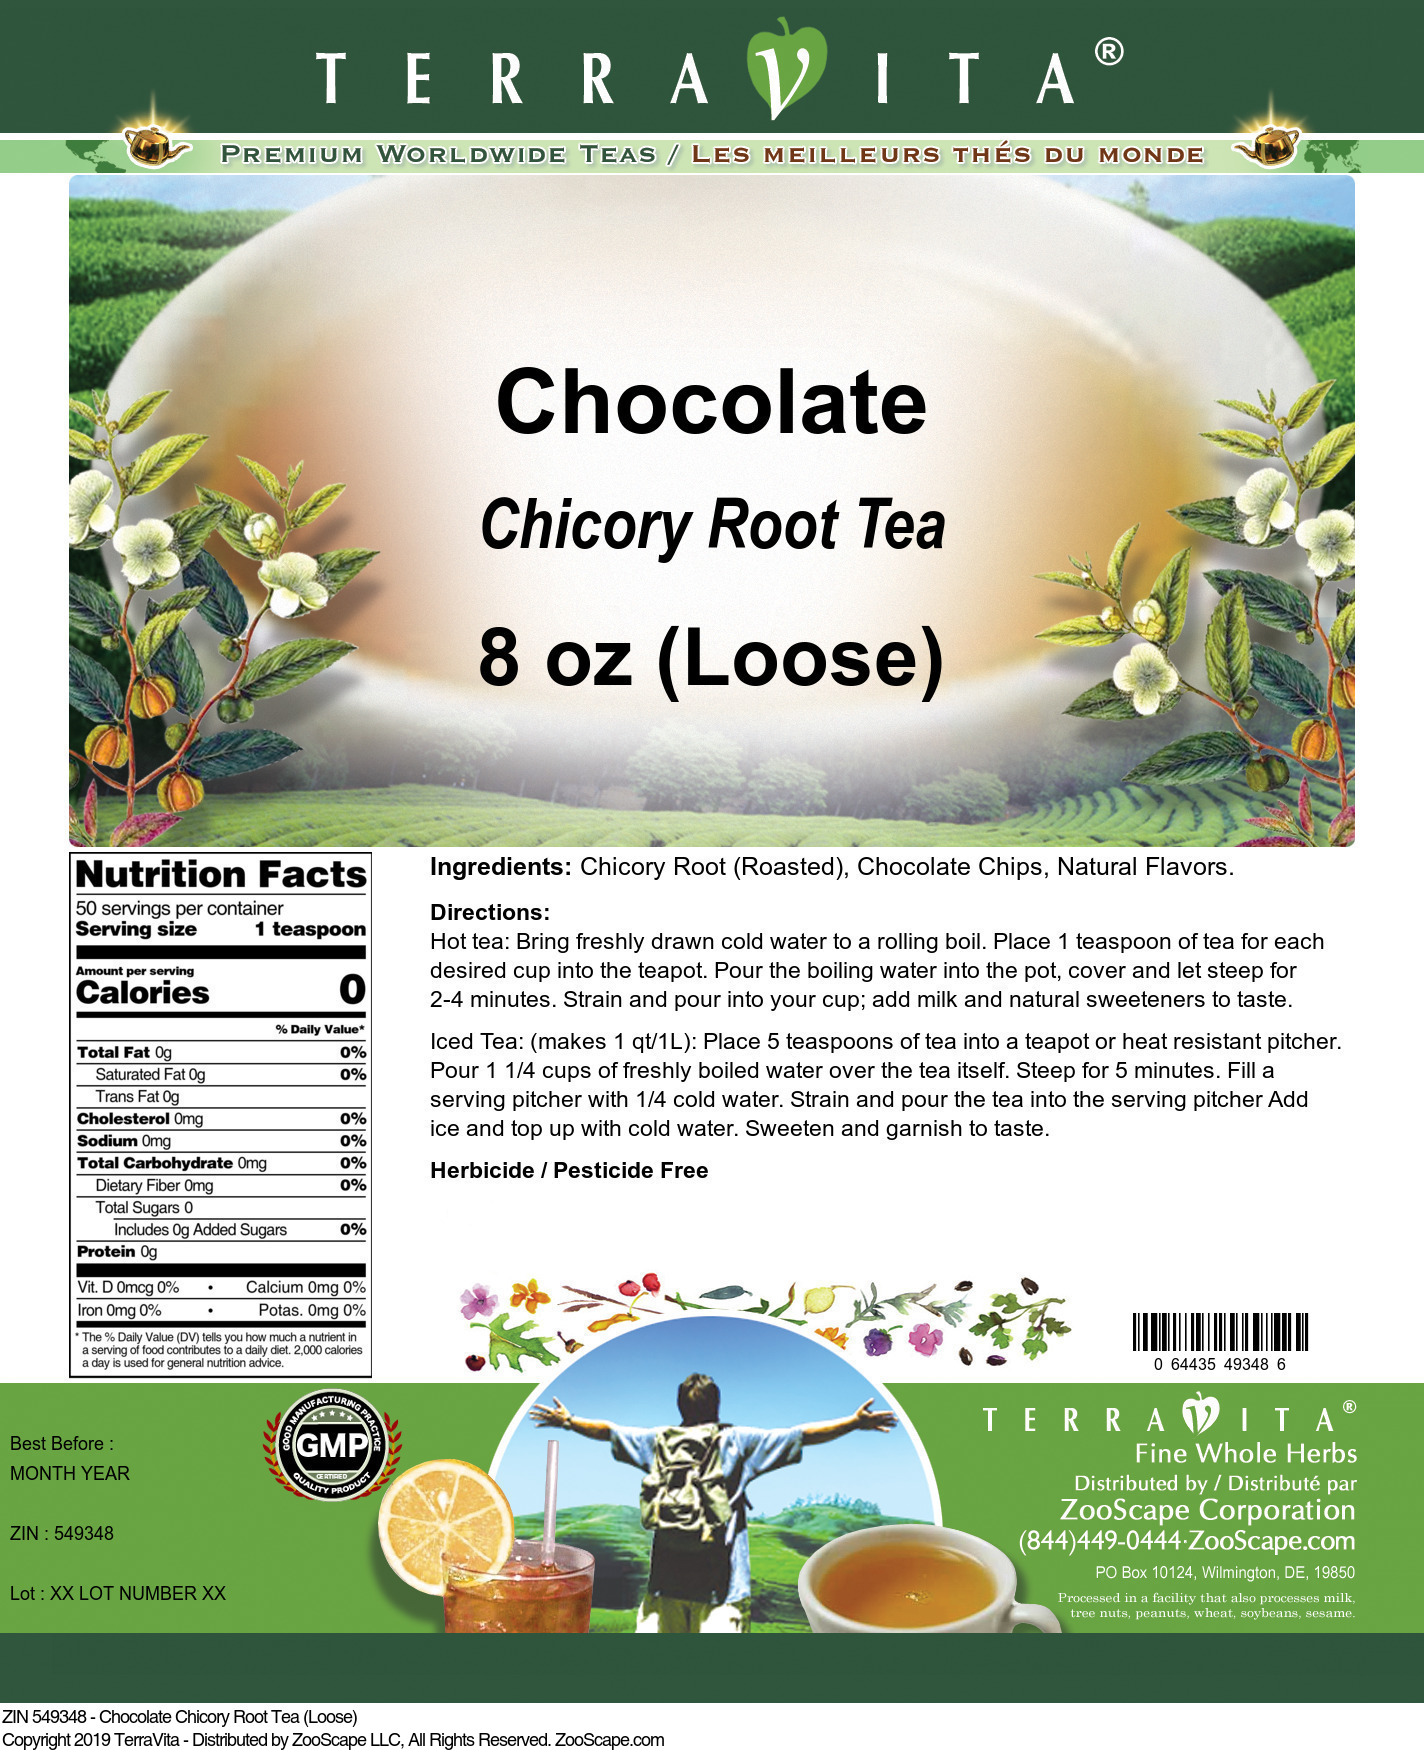 Chocolate Chicory Root Tea (Loose) - Label